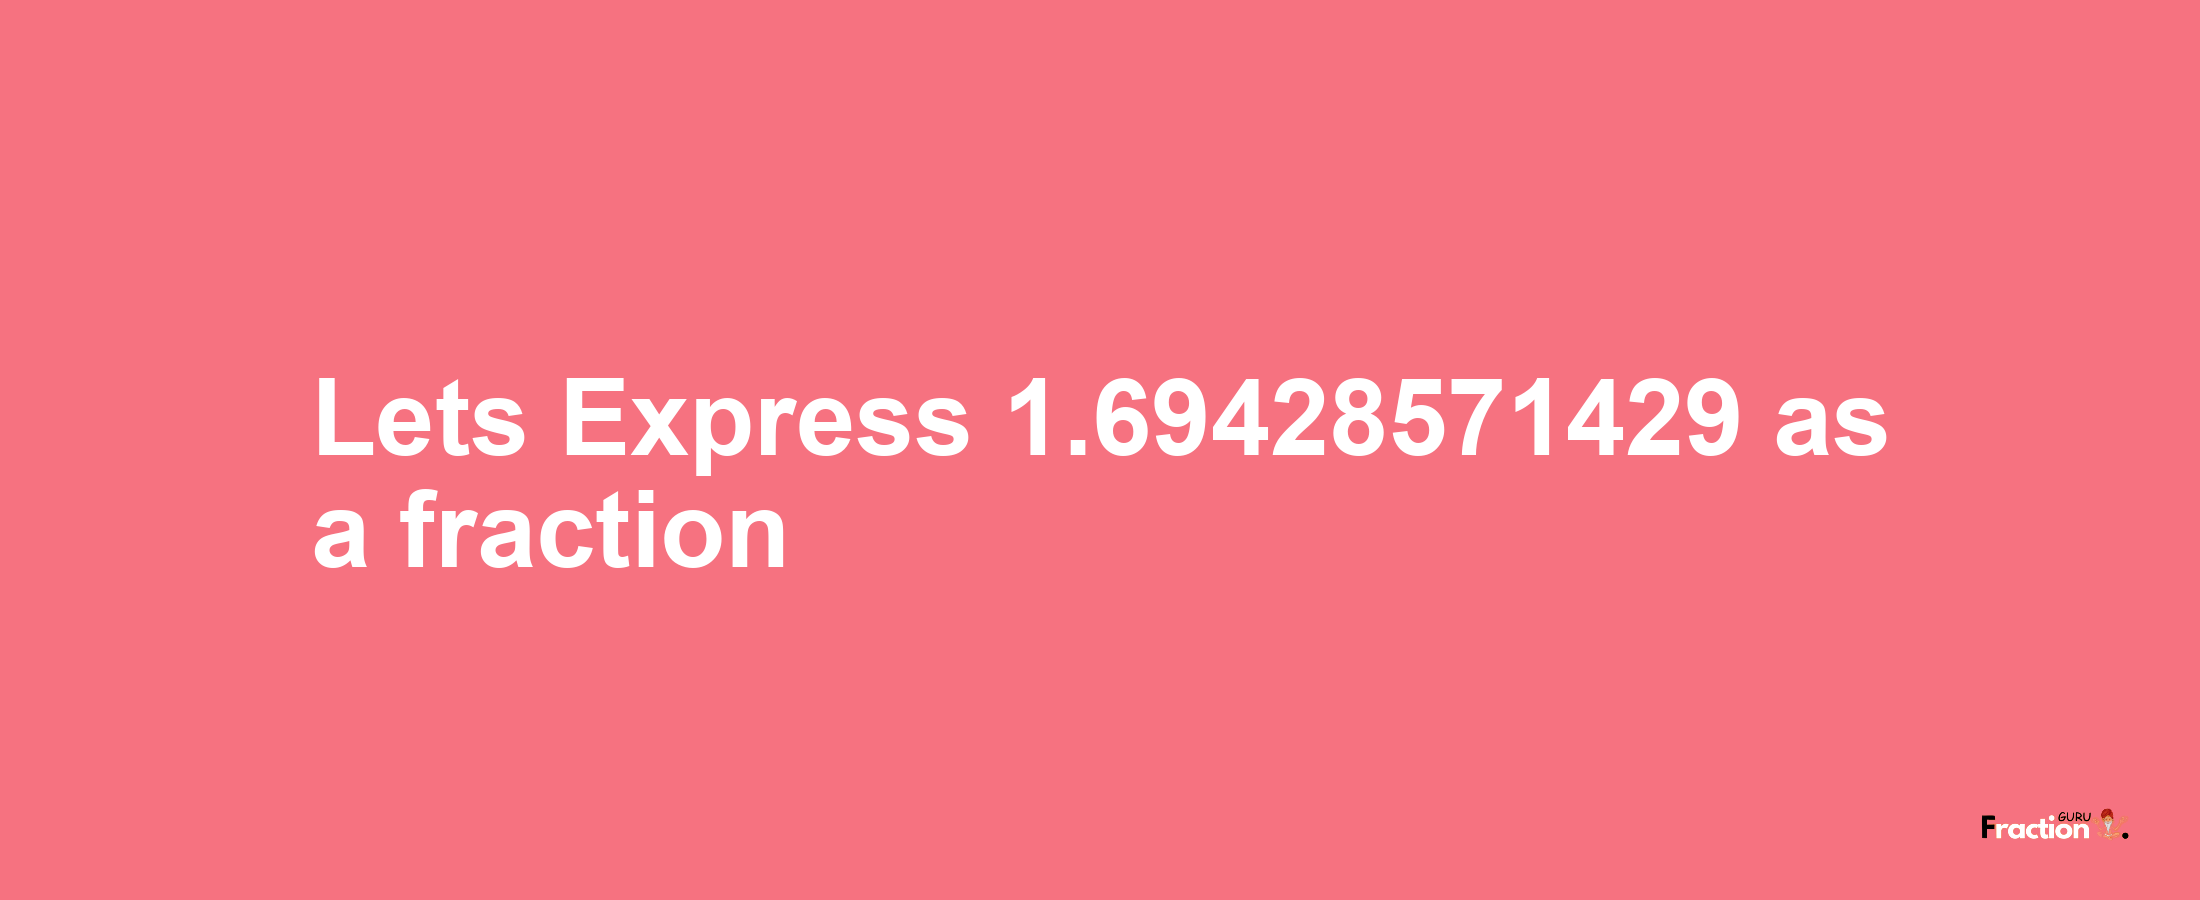 Lets Express 1.69428571429 as afraction